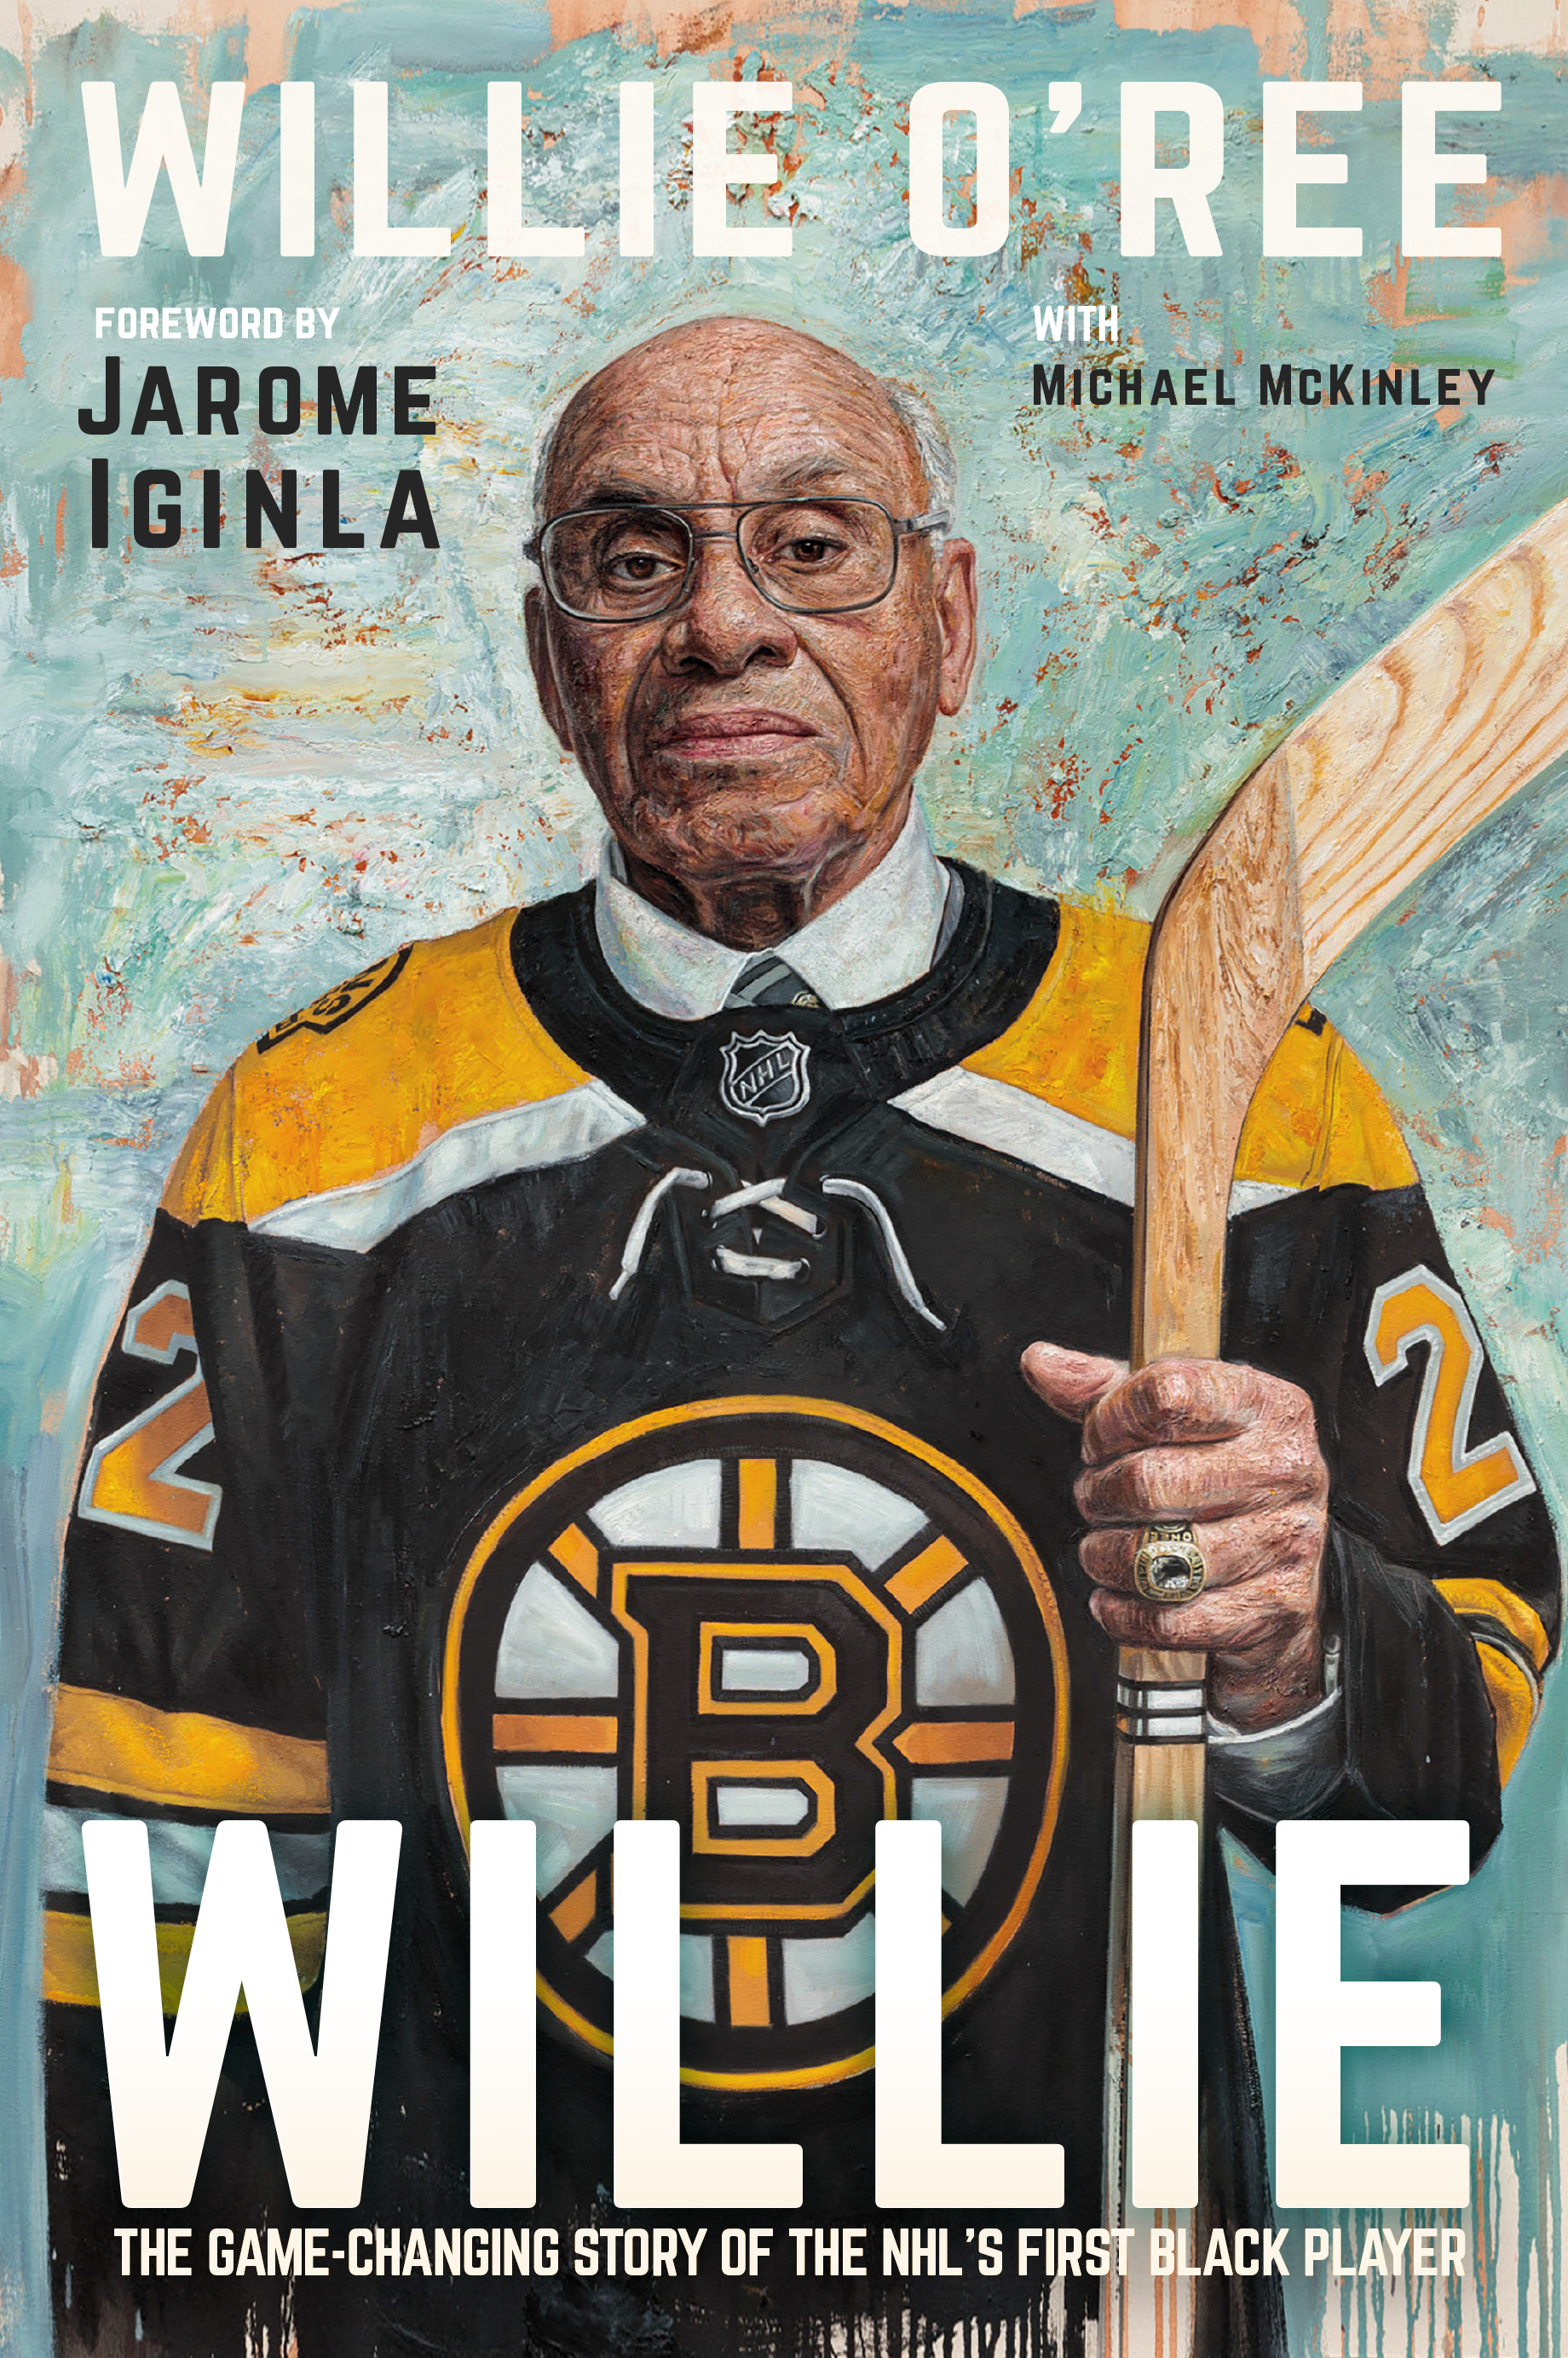 Bruins notebook: Bruins recognize contributions of Willie O'Ree